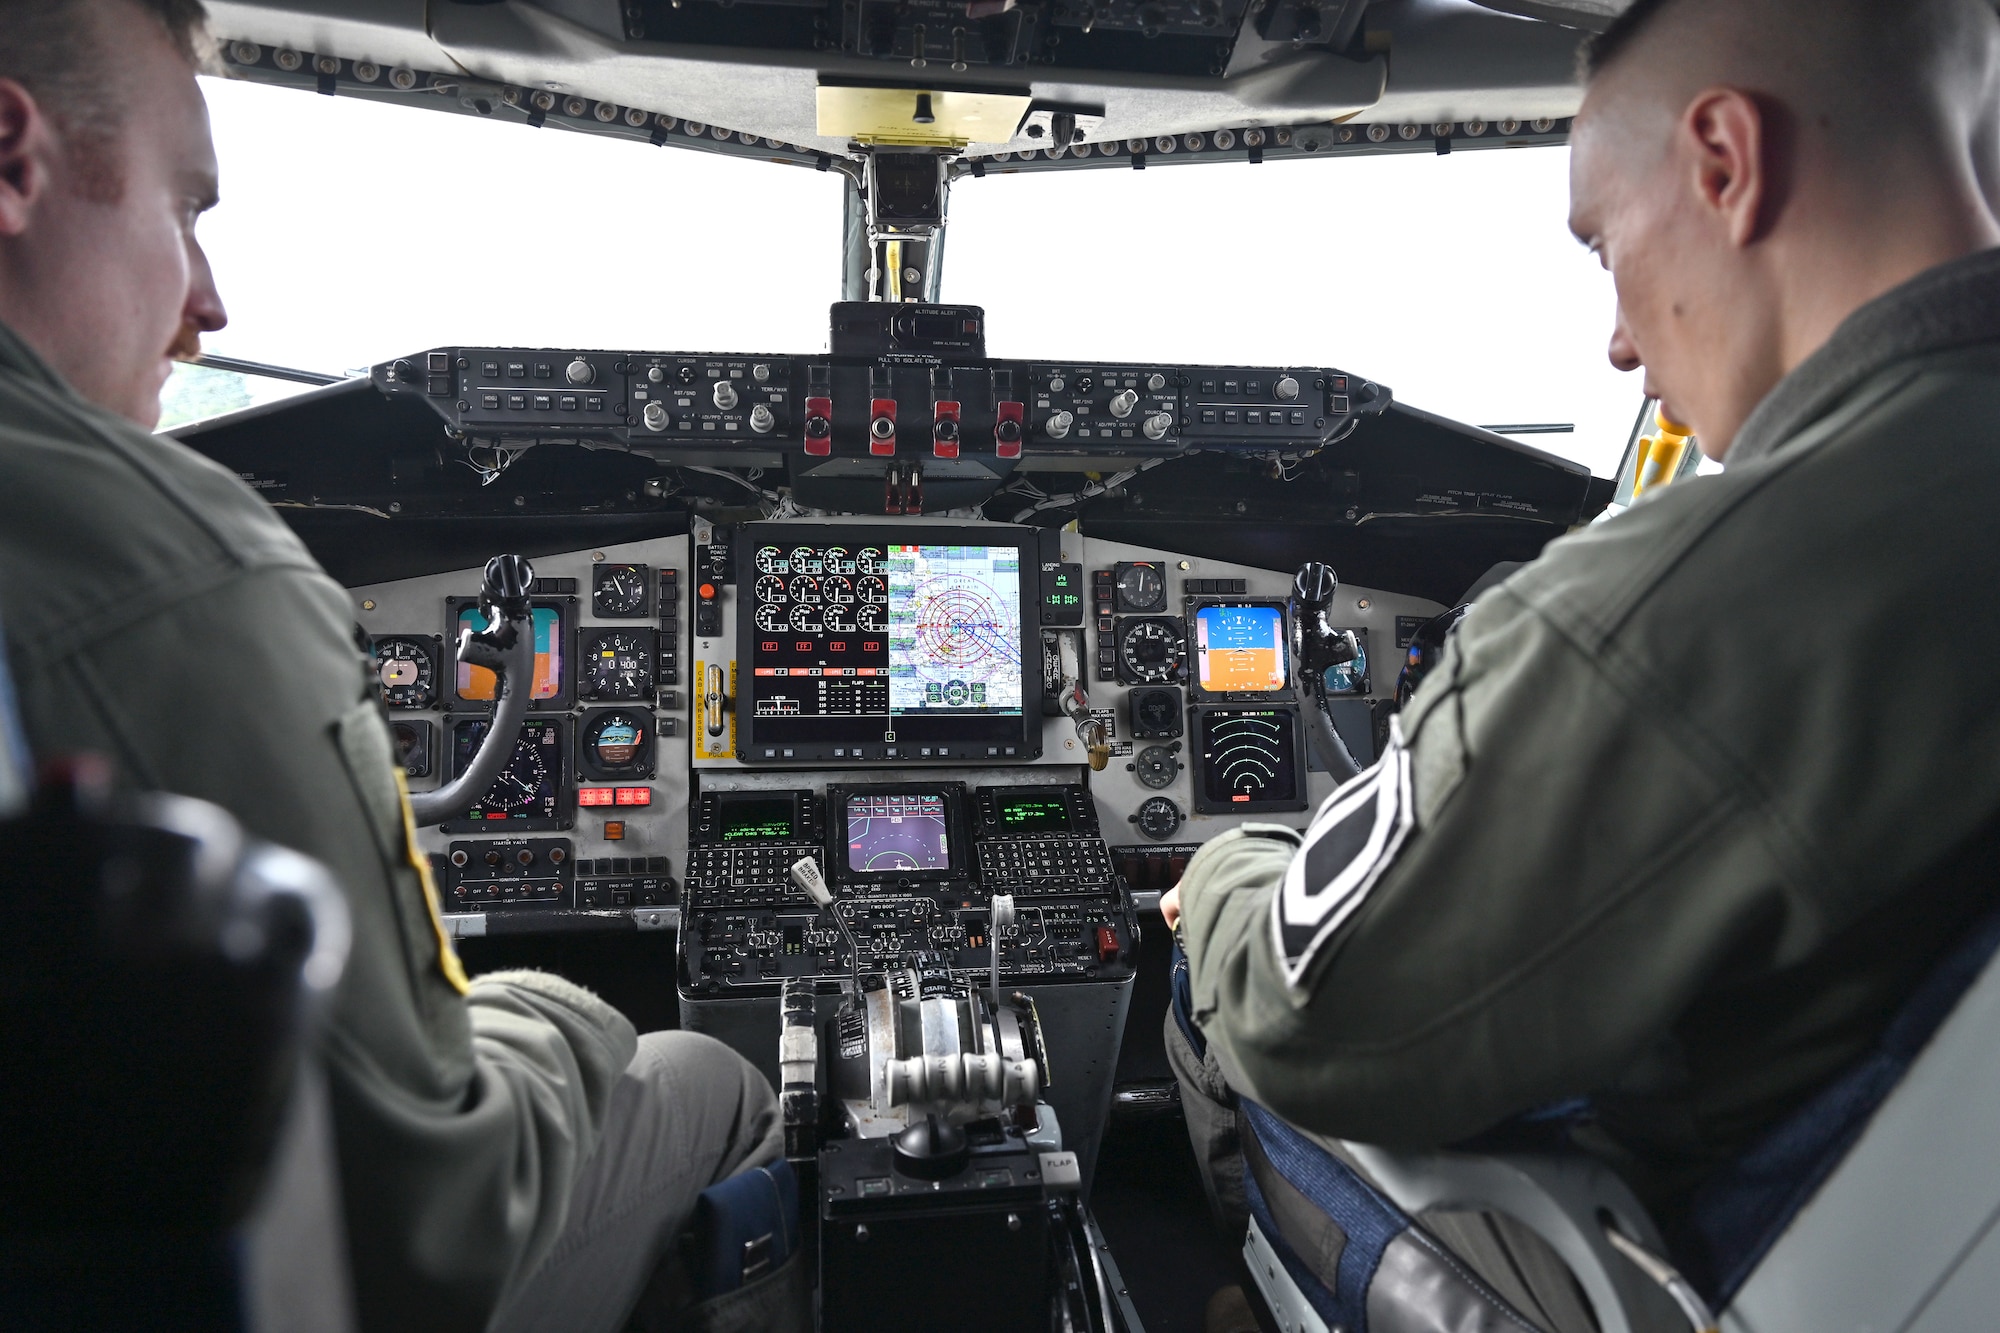 U.S. Air Force Capt. Jarod Suhr, left, 100th Operations Support Squadron pilot and wing tactics officer, clarifies points of the Real-time Information in the Cockpit system to Capt. Anthony Vecchio, 100th OSS pilot and wing tactics officer, on a KC-135 Stratotanker at Royal Air Force Mildenhall, England, Oct. 18, 2023. The newly installed communications system gives aircrew the ability to access vital information including threats, target data and locations of friendly forces, providing much more accurate and instant information. (U.S. Air Force photo by Karen Abeyasekere)